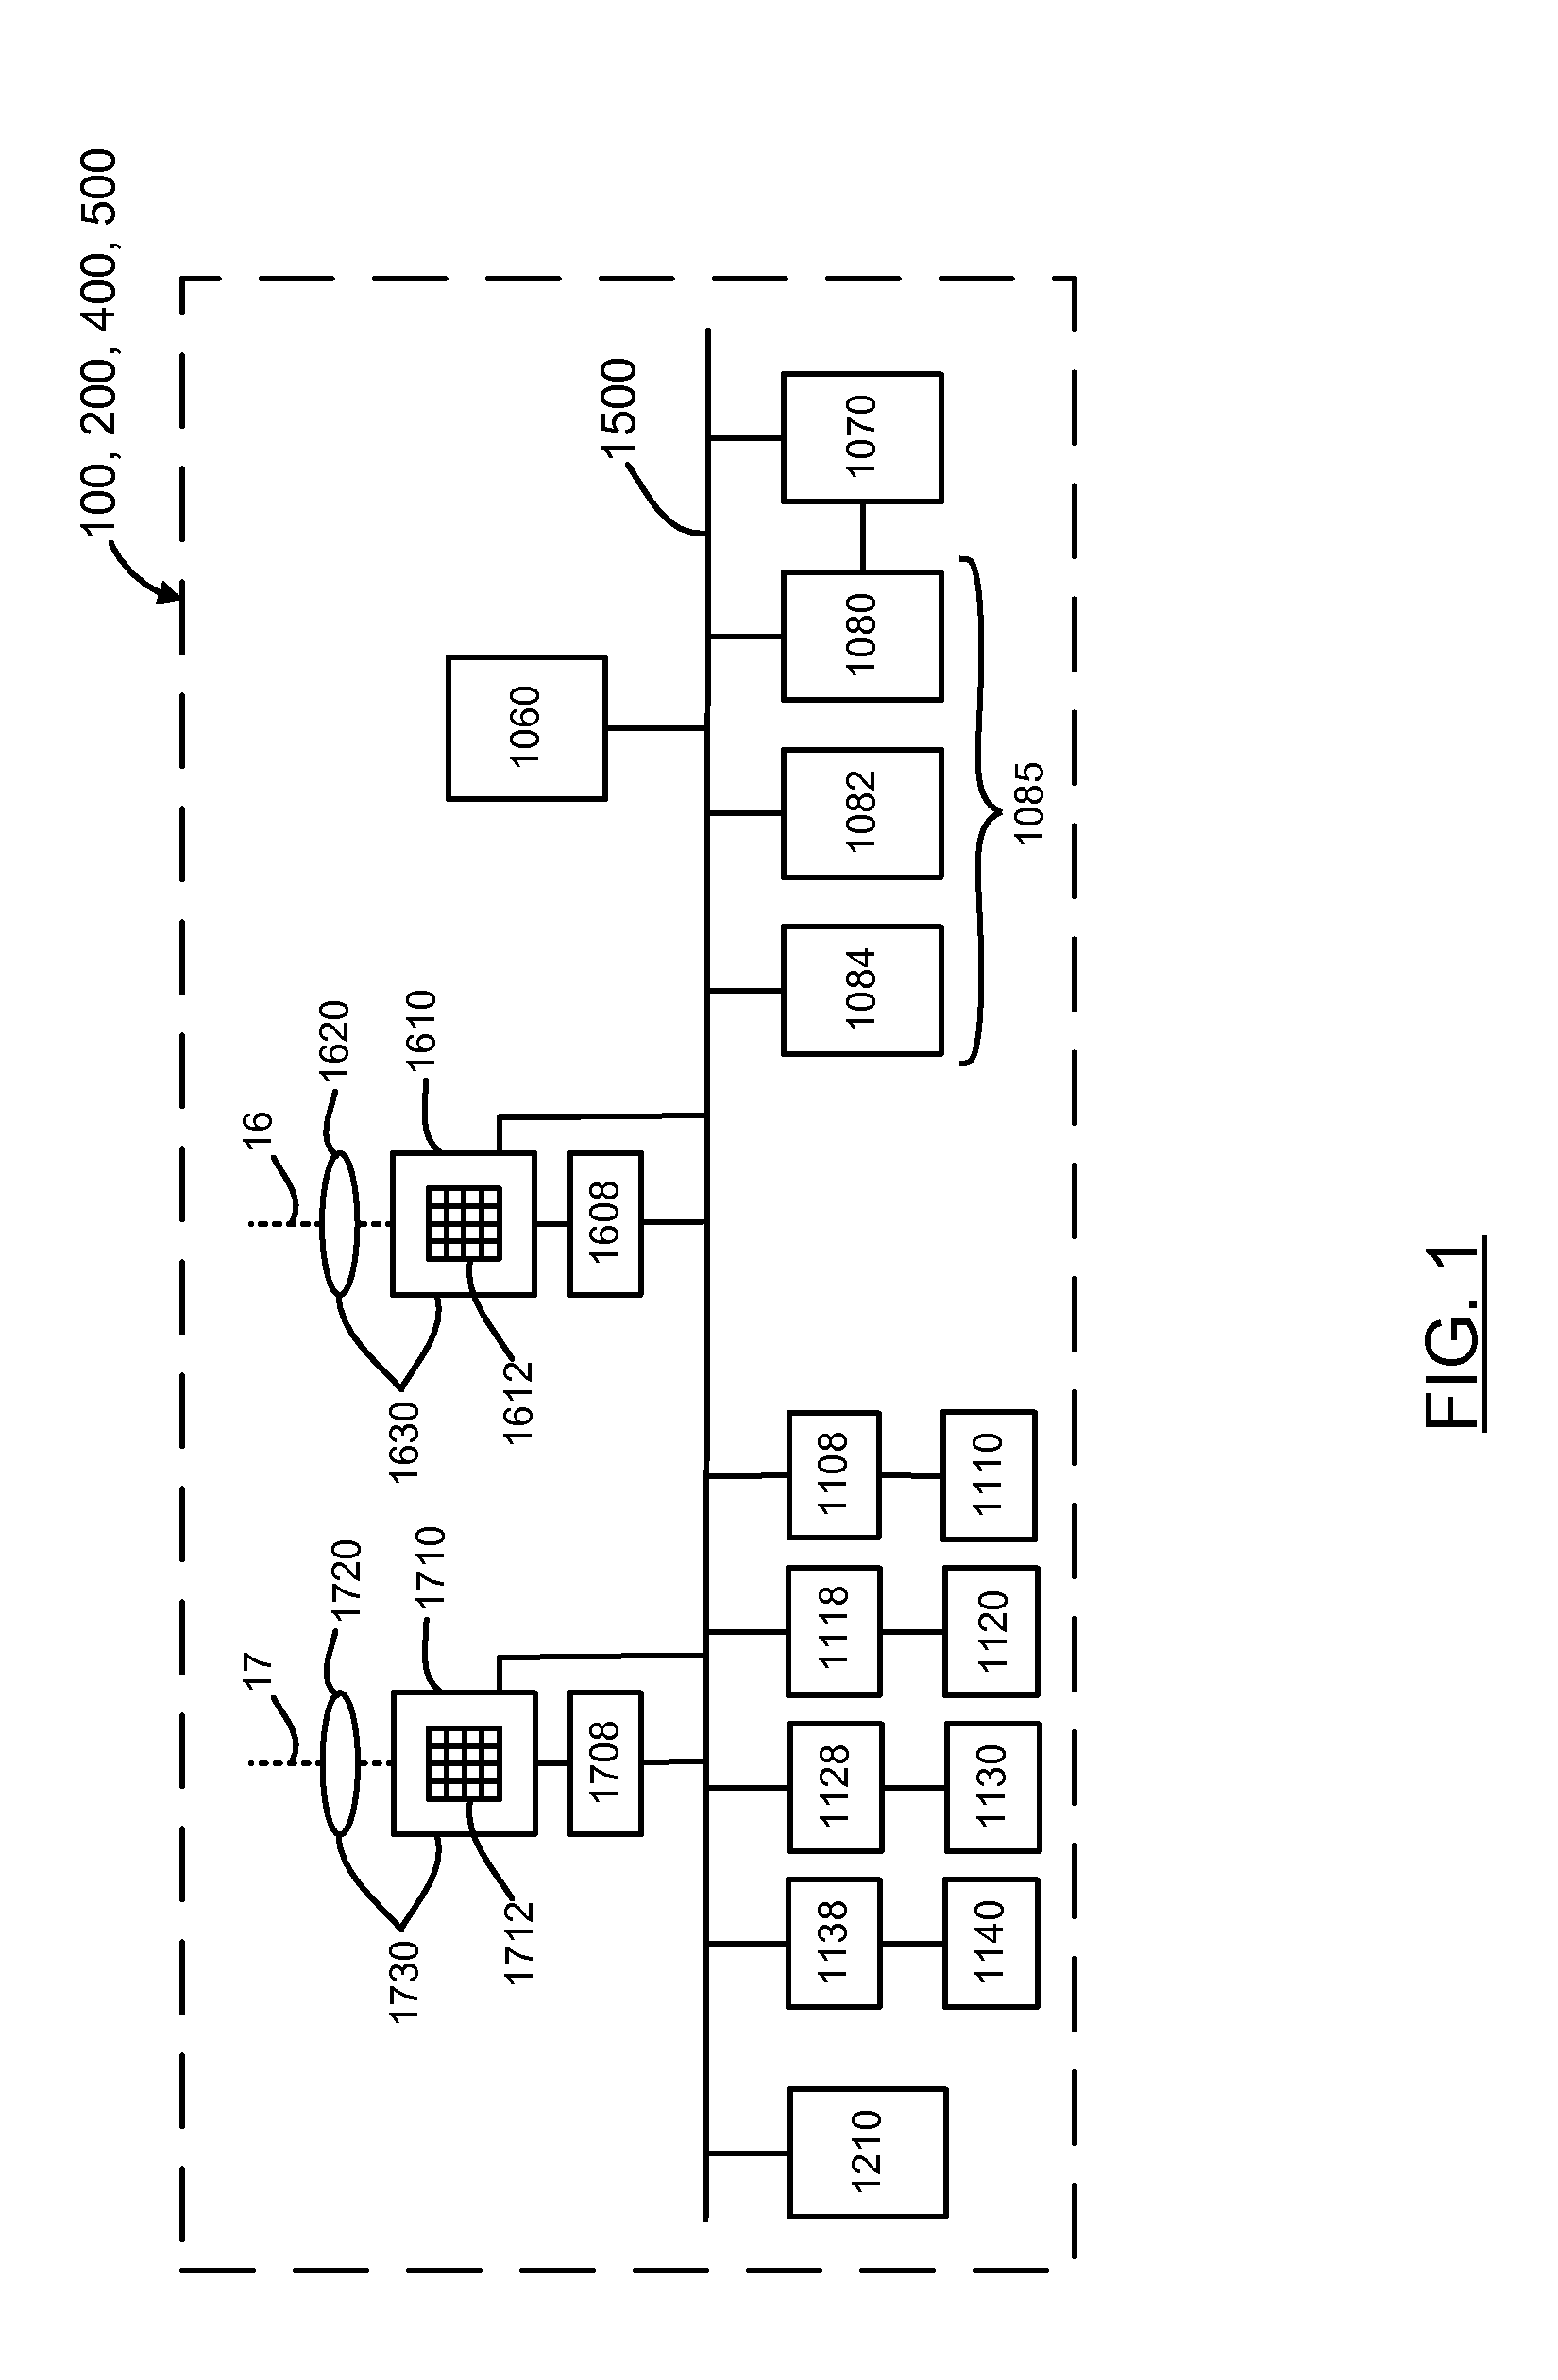 System operative to adaptively select an image sensor for decodable indicia reading